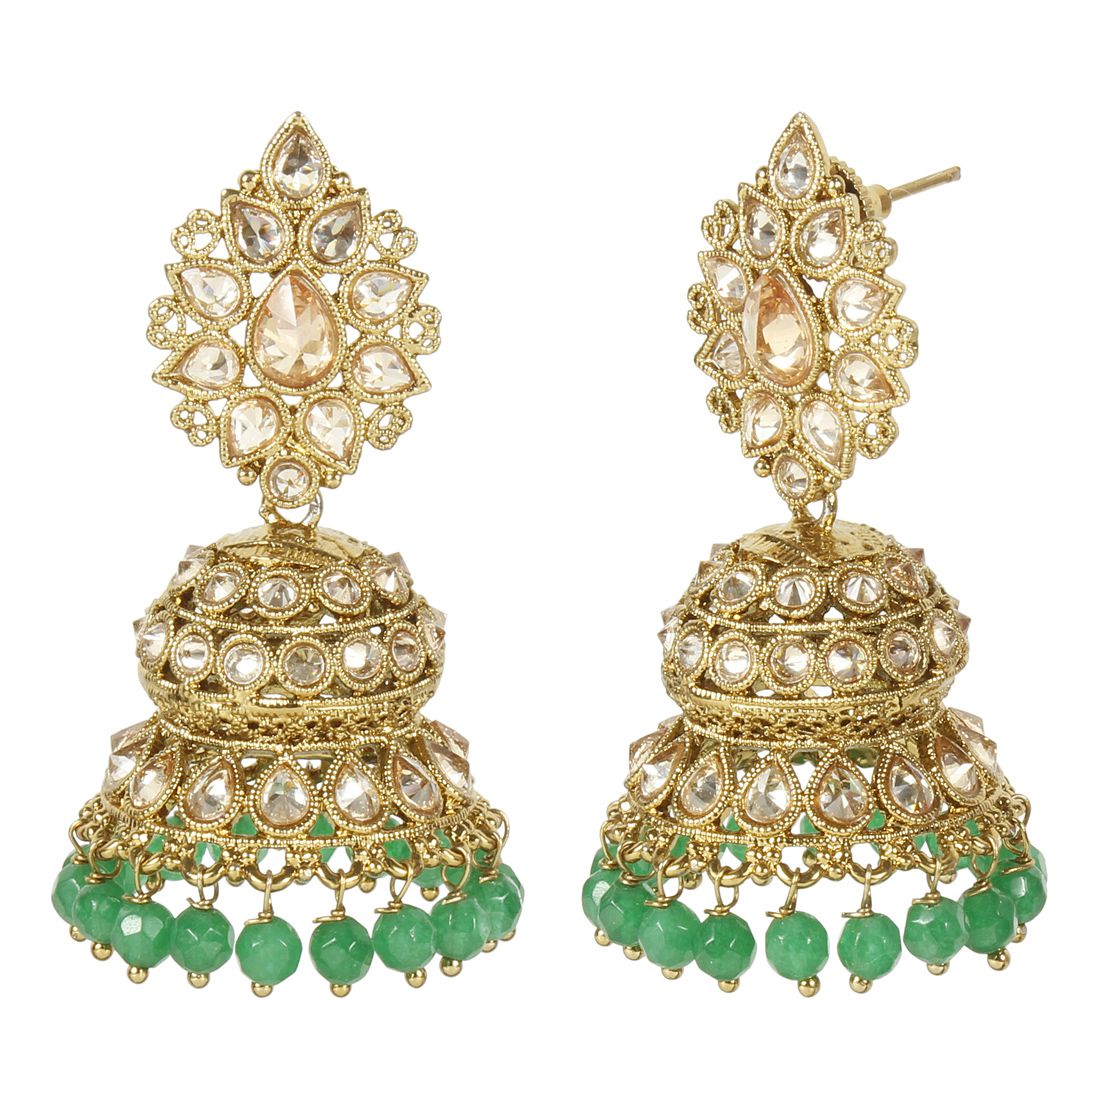 MUCH MORE Indian Polki Earring Gold Tone With Dropping of Emerald Stone ...